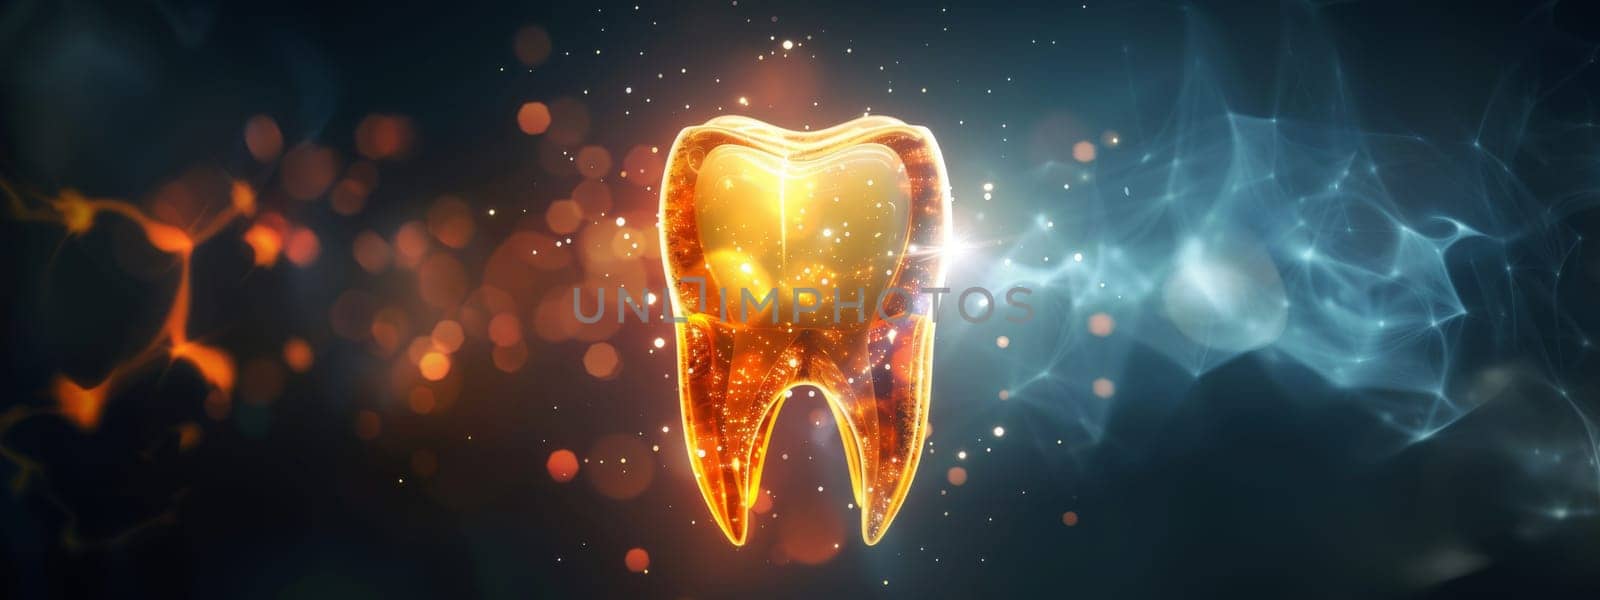 Tooth enamel of a dental tooth with cold and hot effects glowing around, healthy lifestyle concept